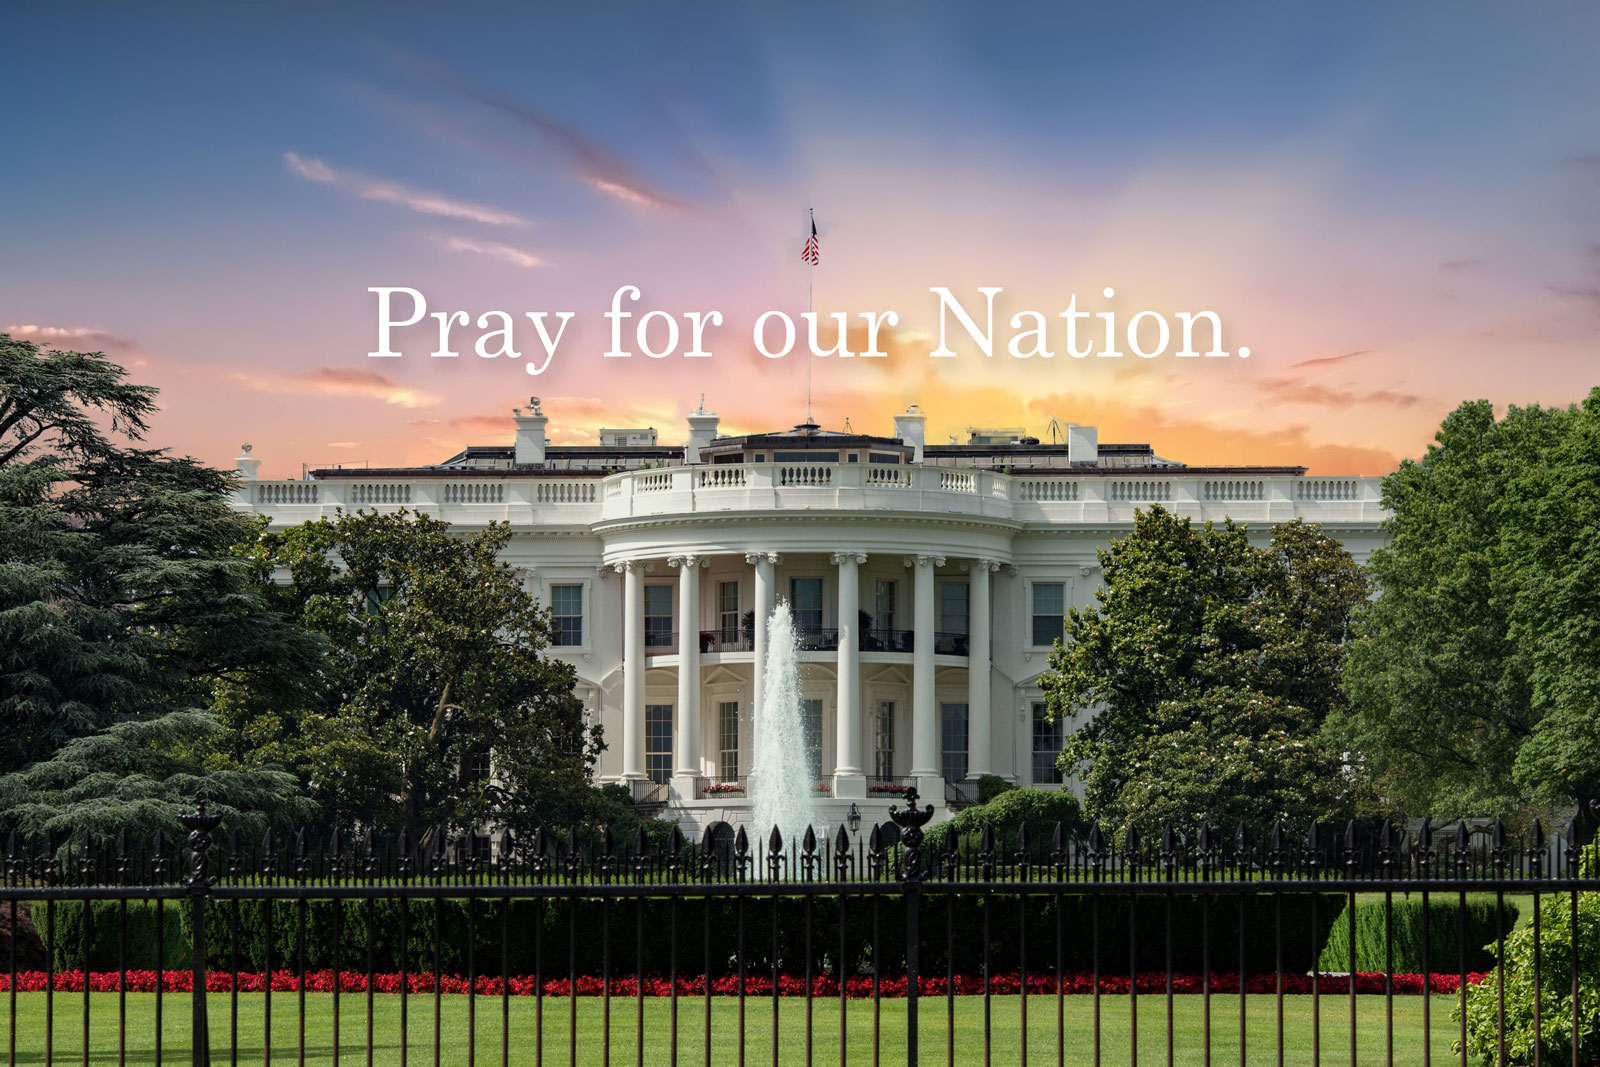 Pray for our Nation